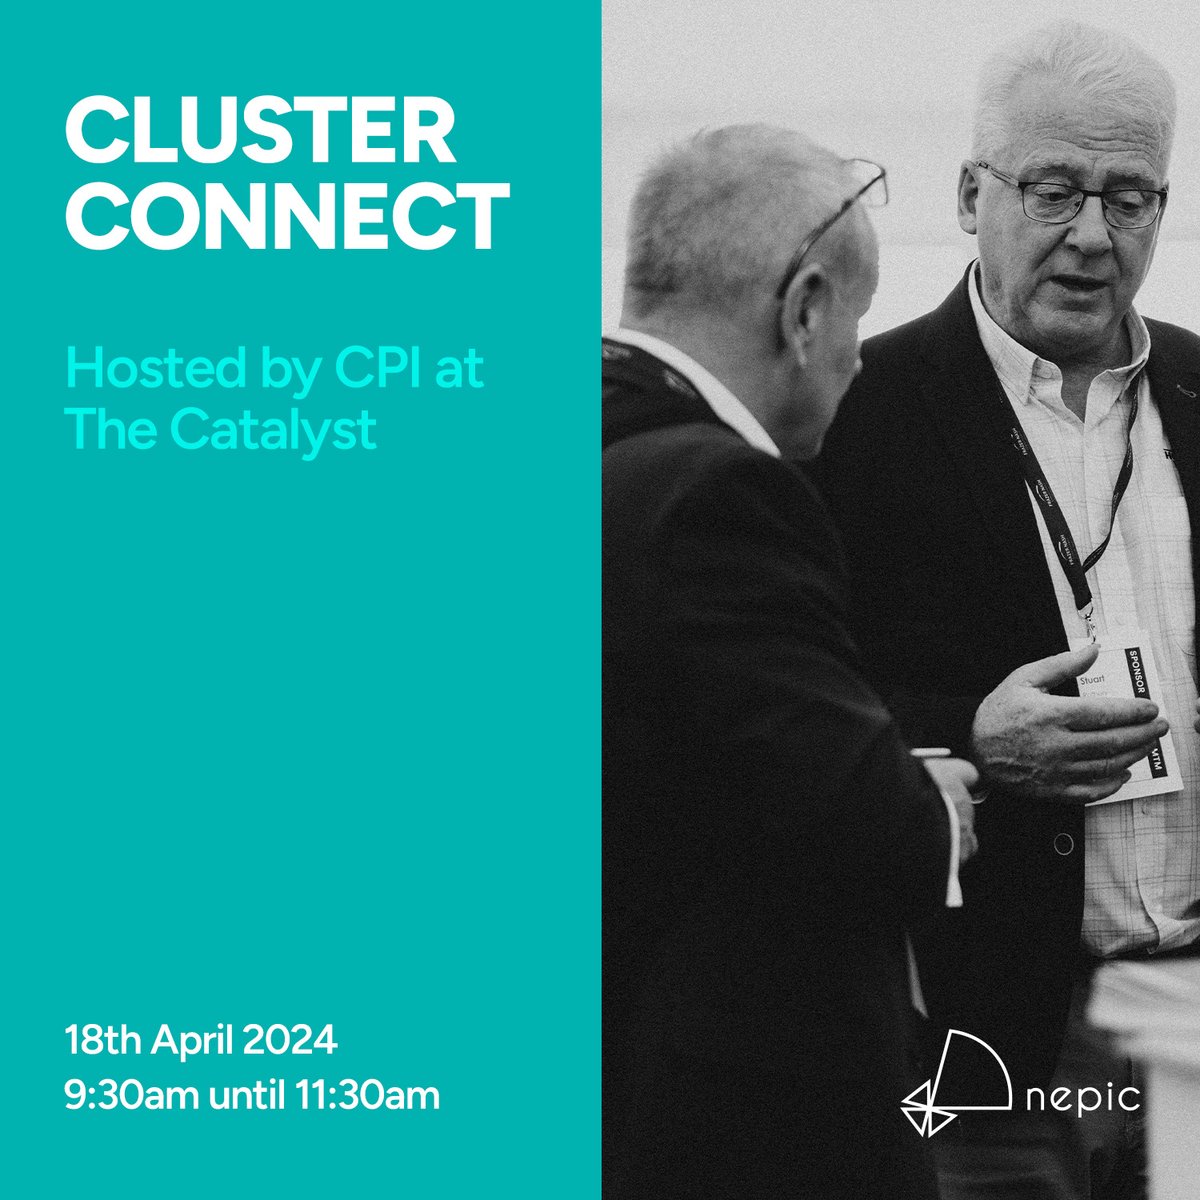 Only two days until our Cluster Connect ❗️ Register your place at our FREE monthly networking event here 👉 eventbrite.co.uk/e/cluster-conn… @ukCPI @WadeConstMgmt @newcastlehelix #IndustryNetworking #BusinessNetworking